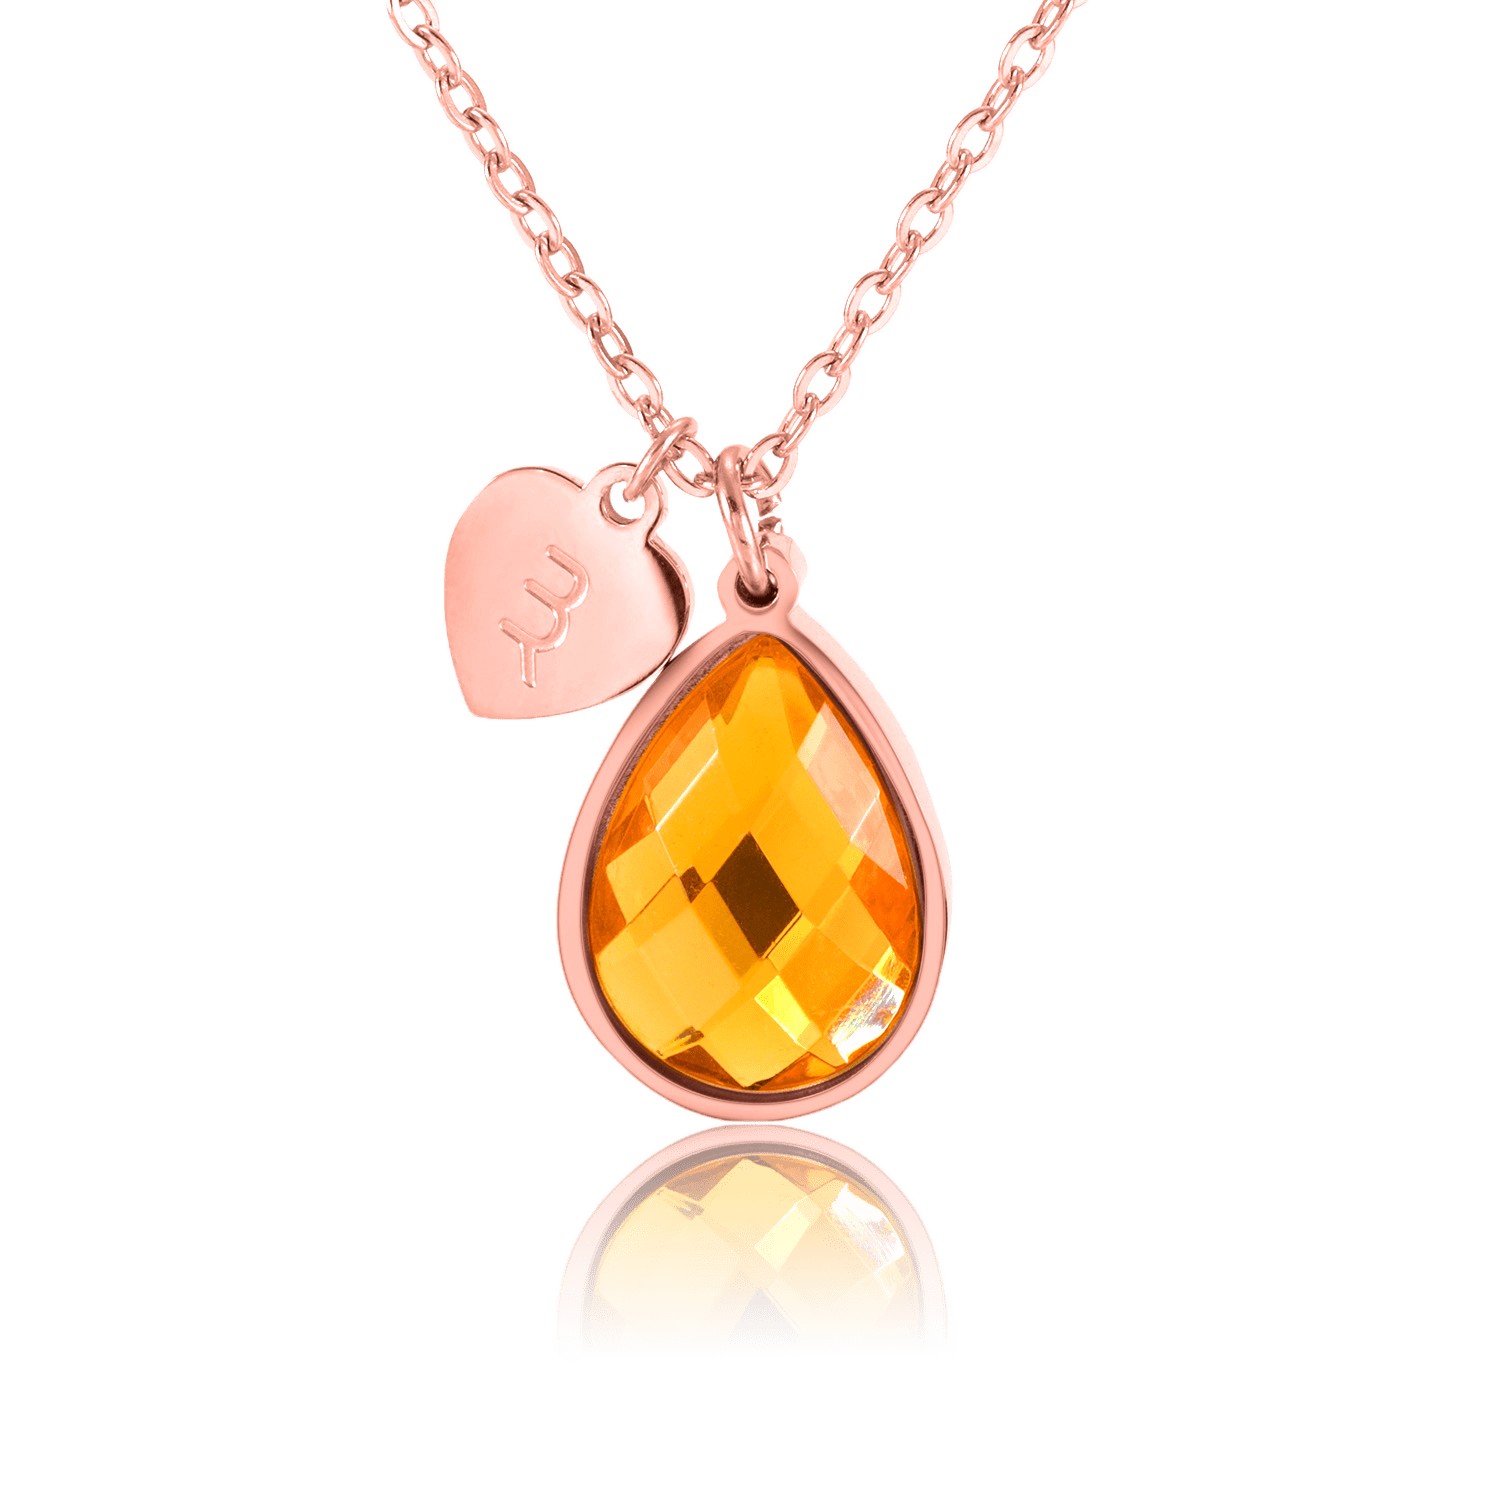 bianco rosso Necklaces Rose Gold November Birthstone - Citrine cyprus greece jewelry gift free shipping europe worldwide